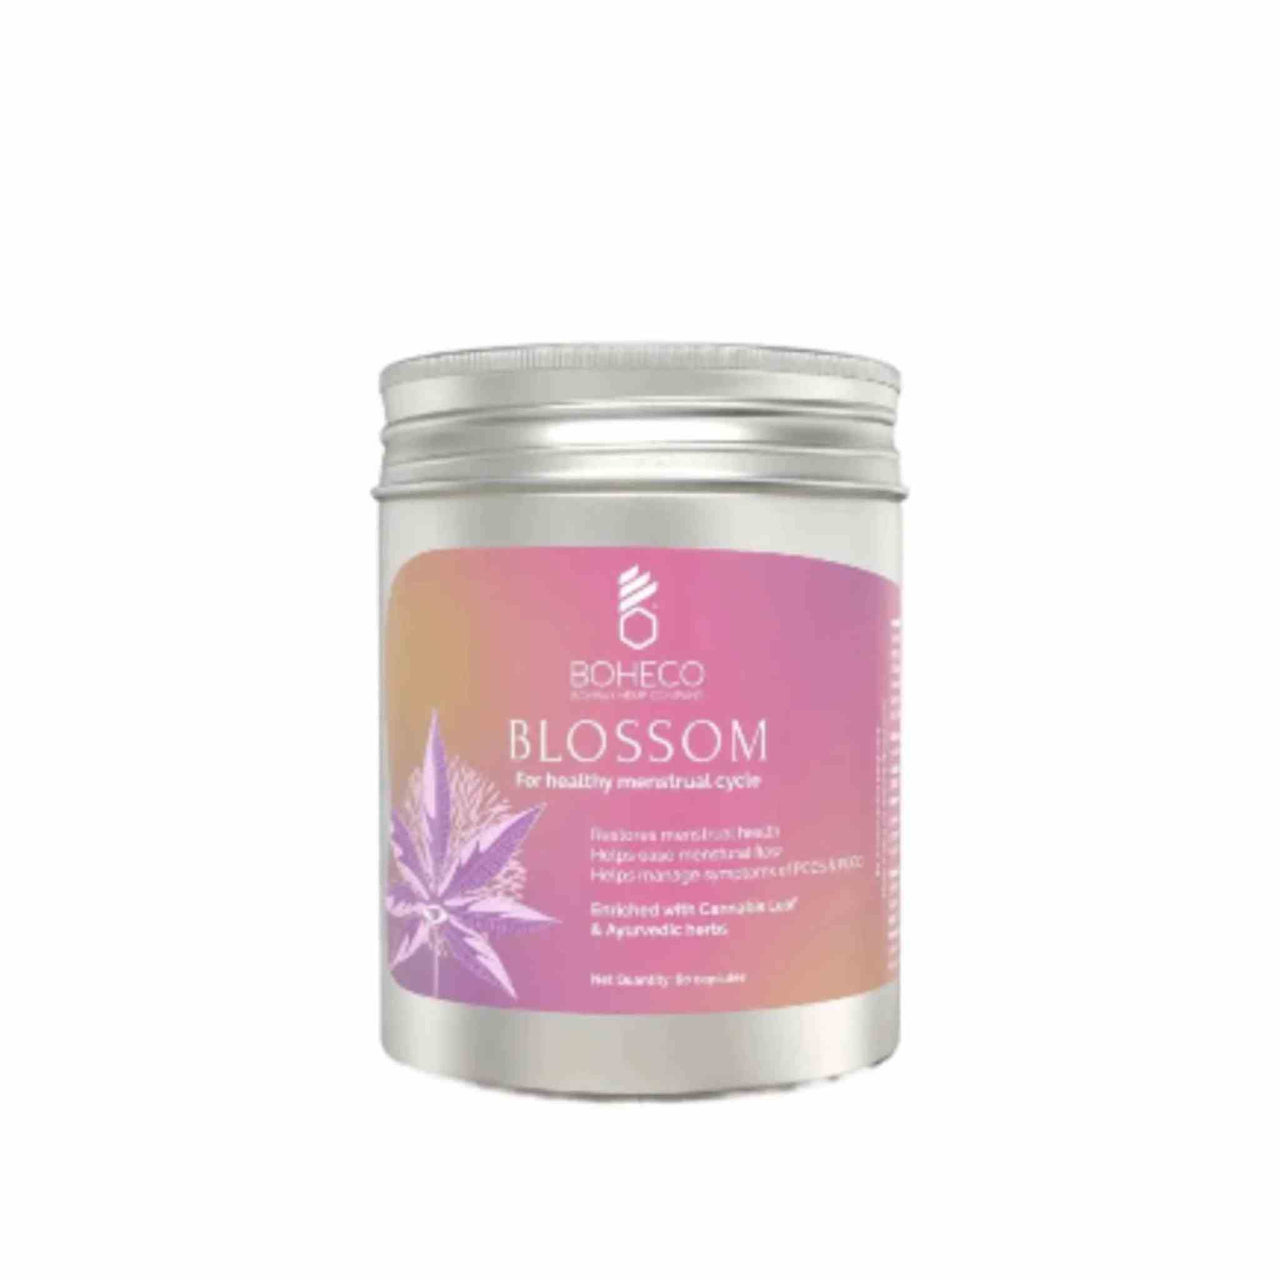 Boheco Blossom - For Healthy Menstrual Cycle